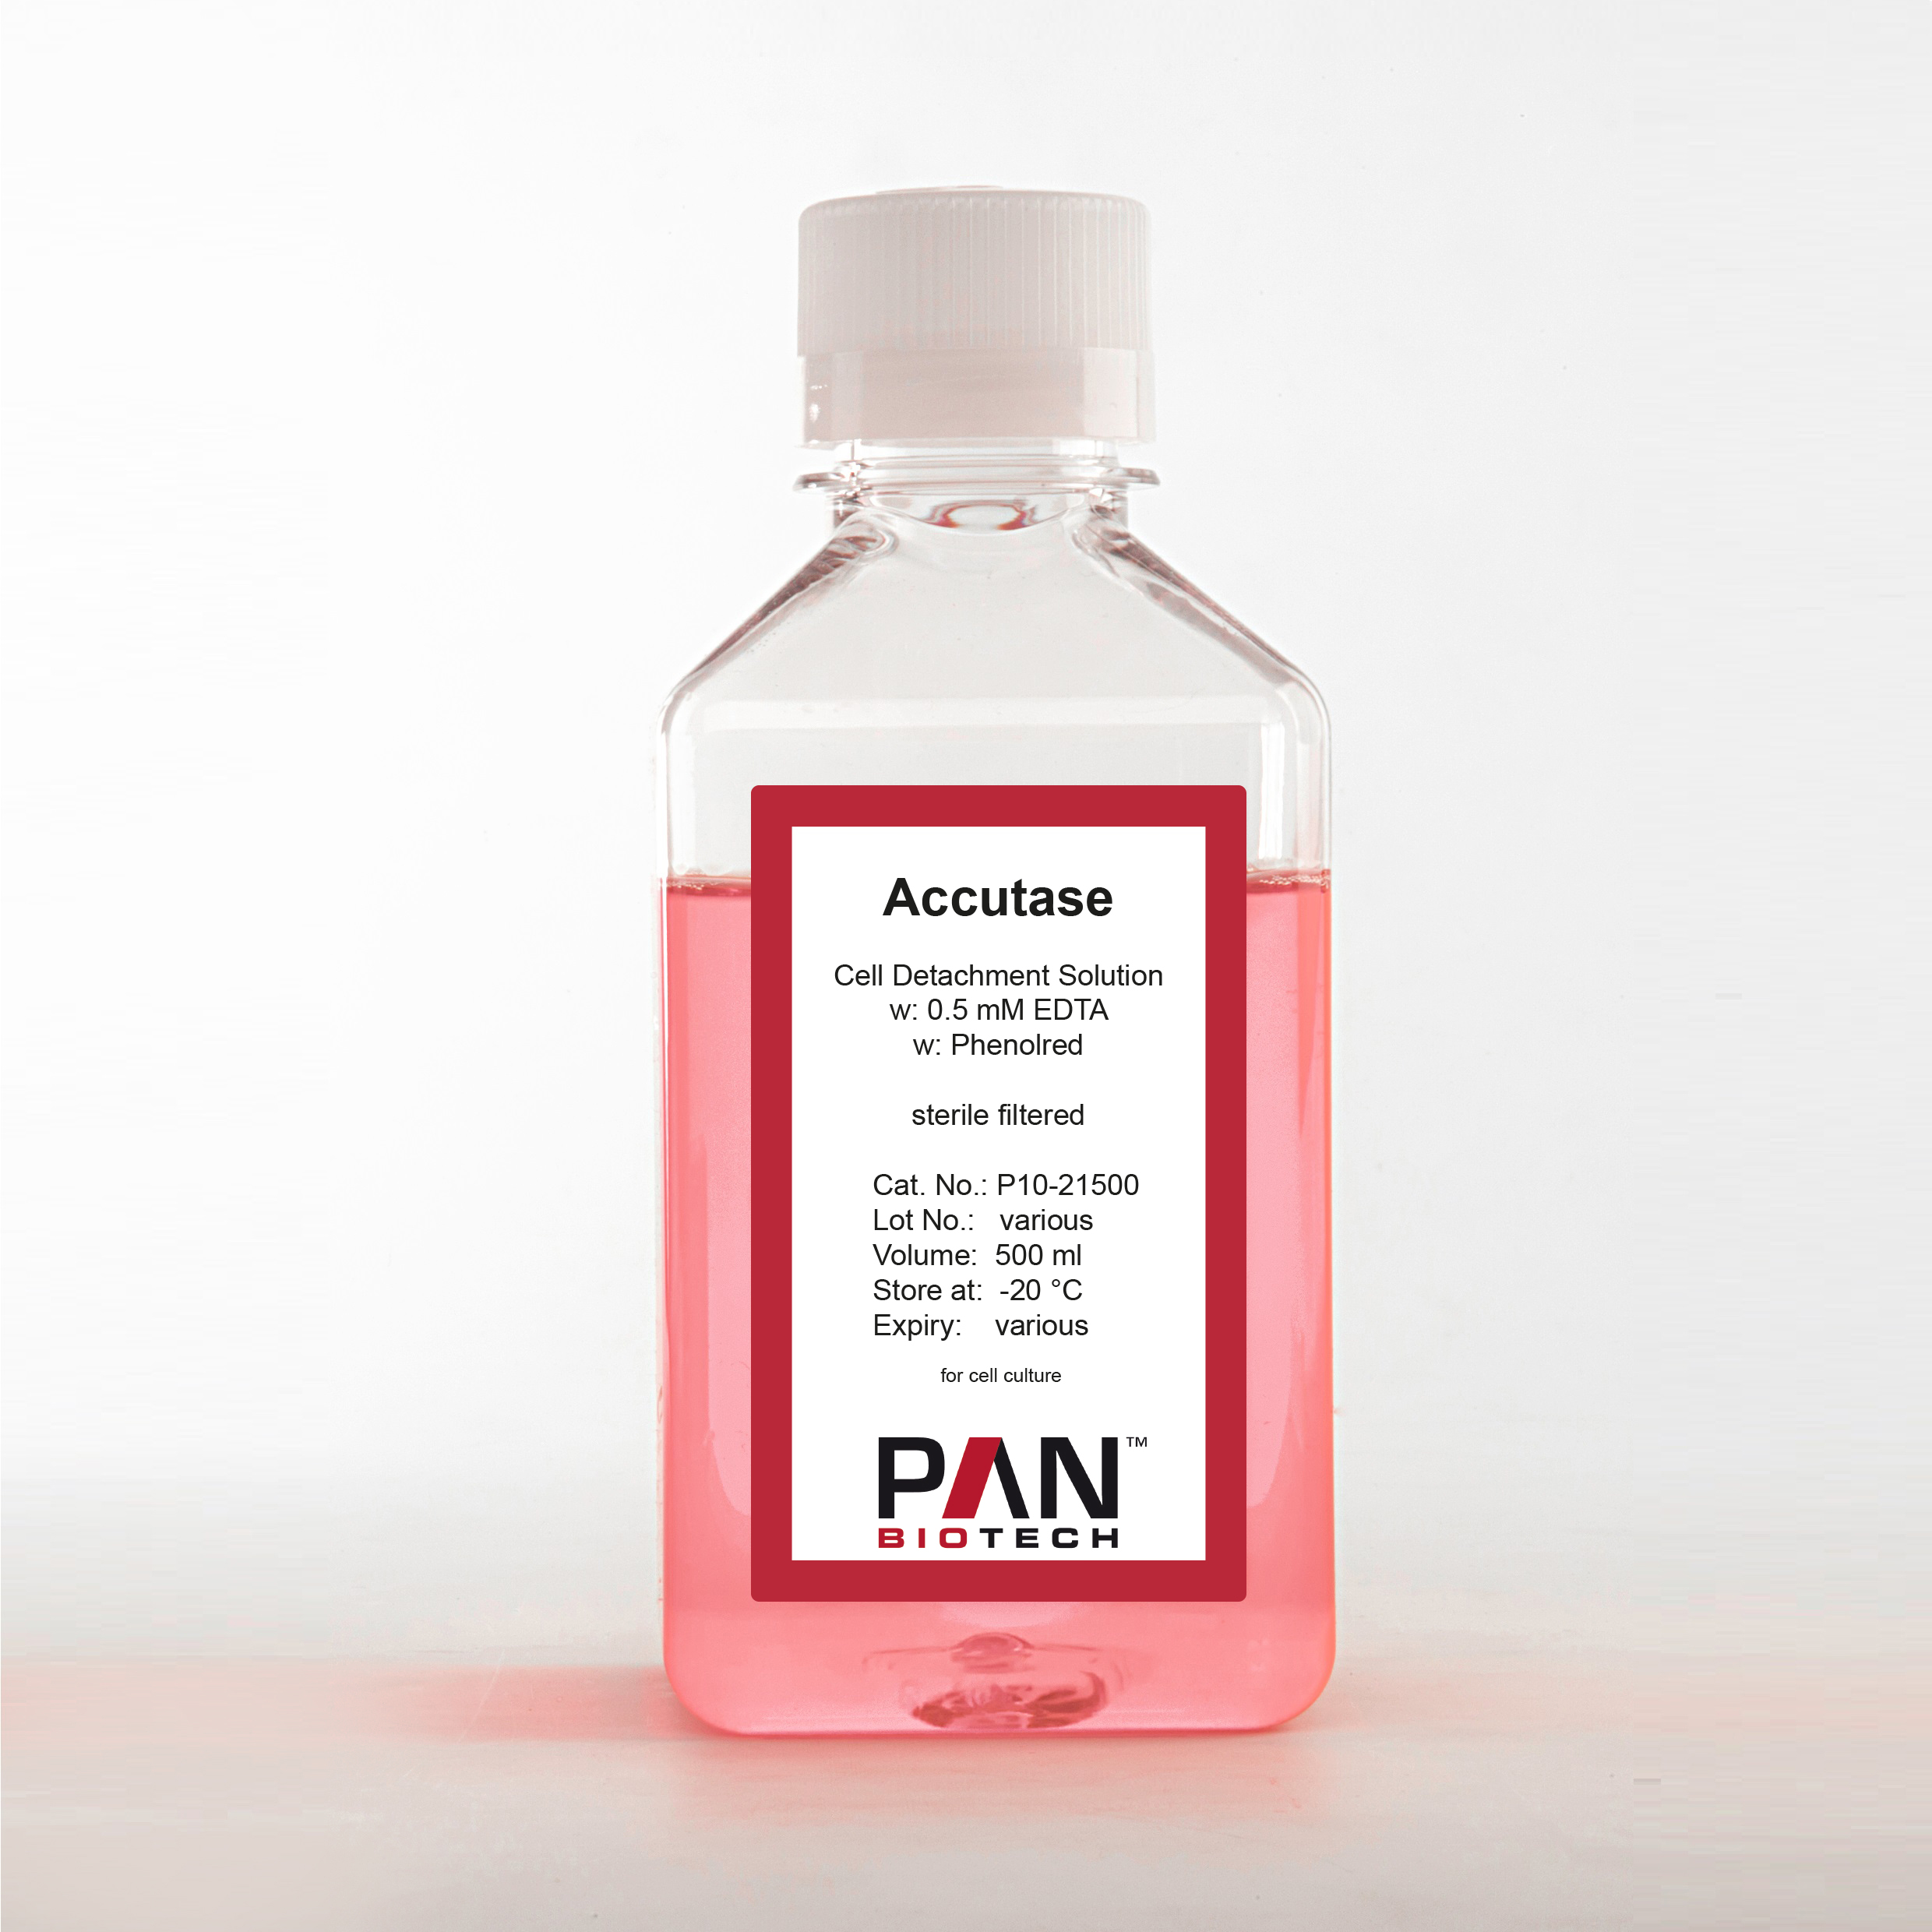 Accutase Cell Detachment Solution, w: 0.5 mM EDTA, w: Phenol red